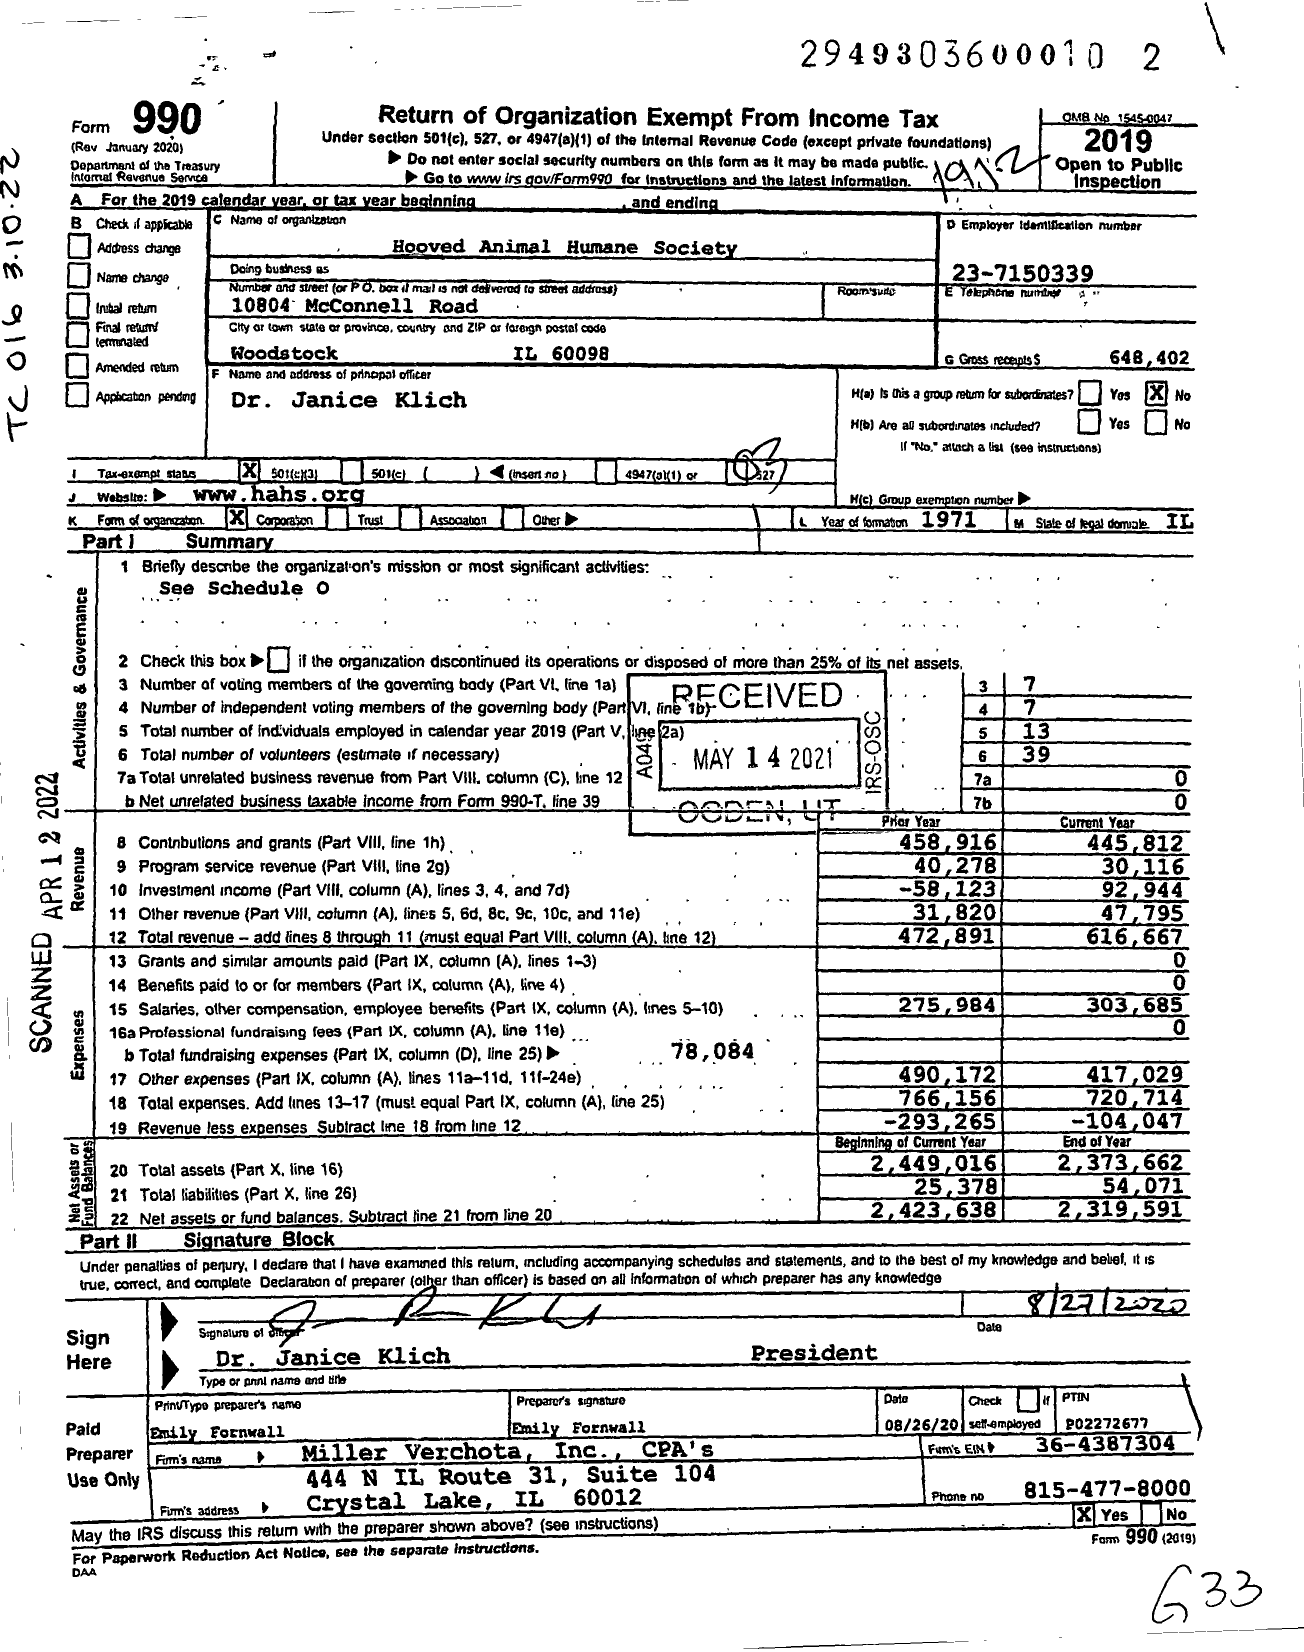 Image of first page of 2019 Form 990 for Hooved Animal Humane Society